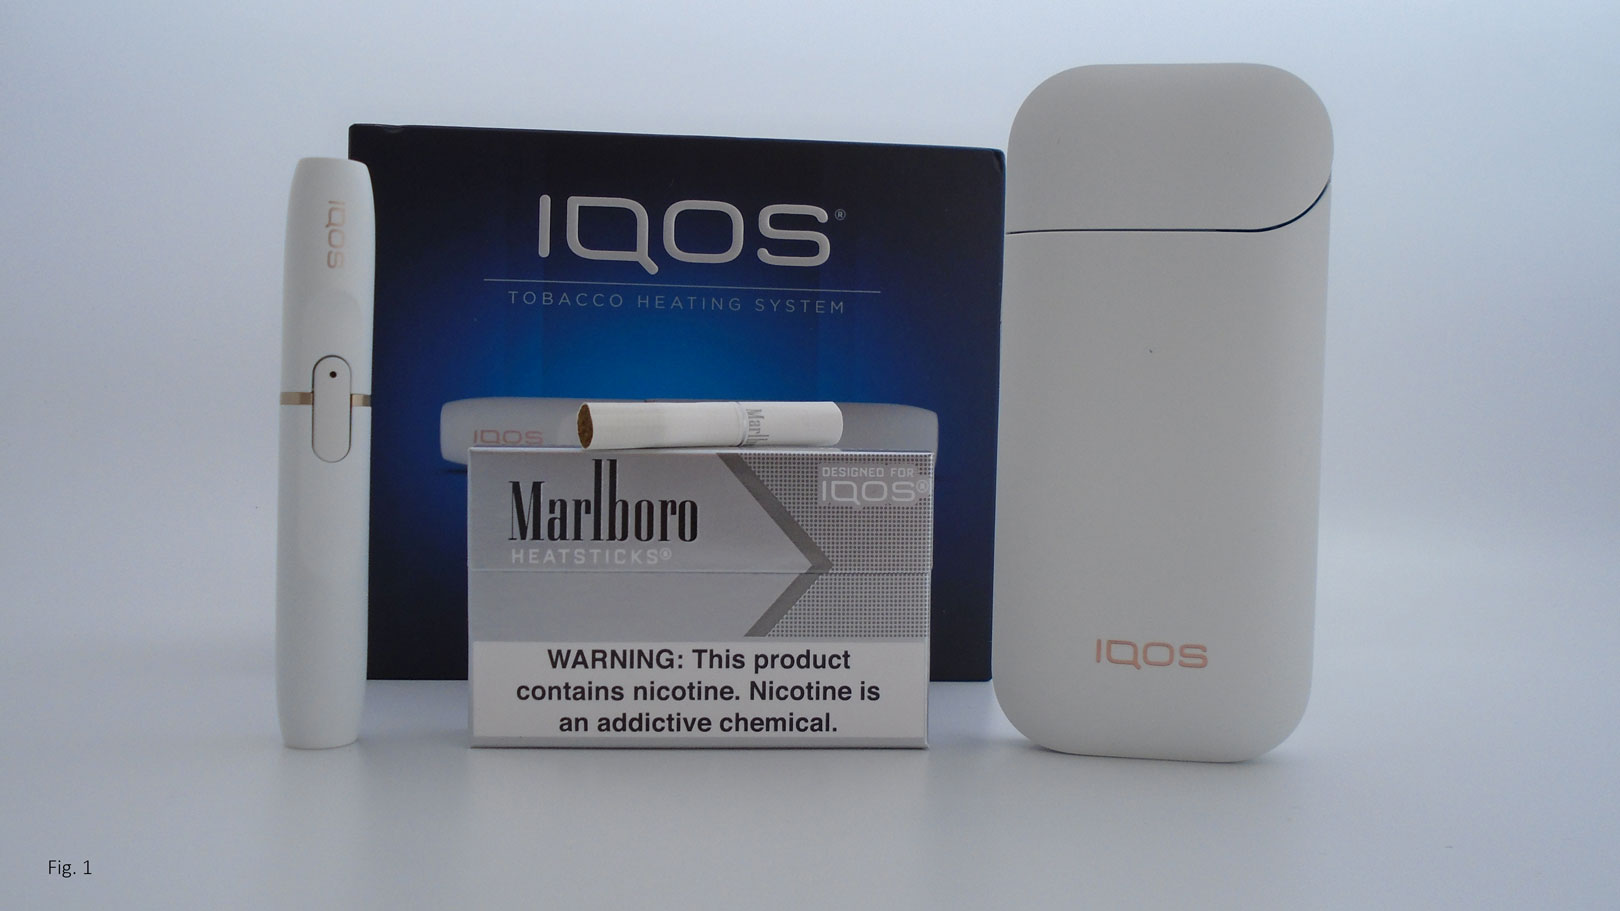 IQOS in the U.S.